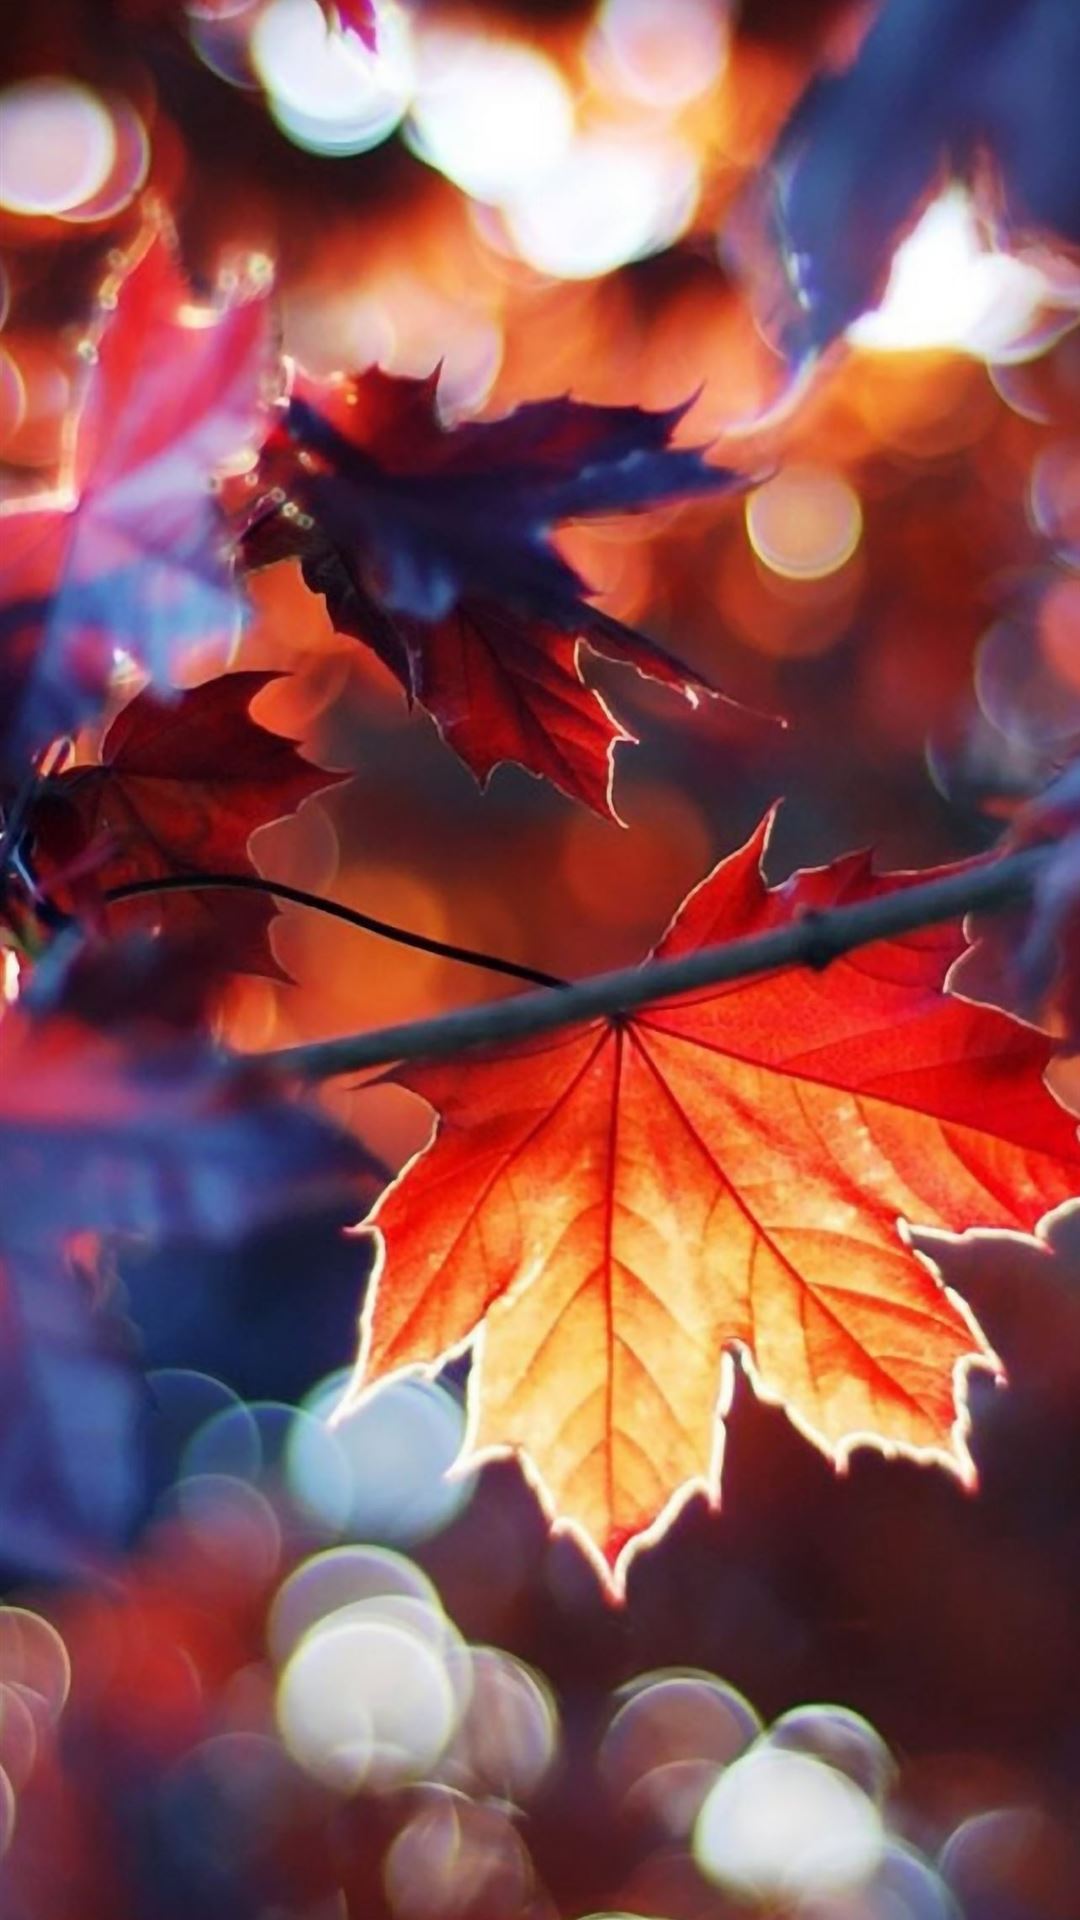 Autumn Leaves iPhone Wallpaper Free Download